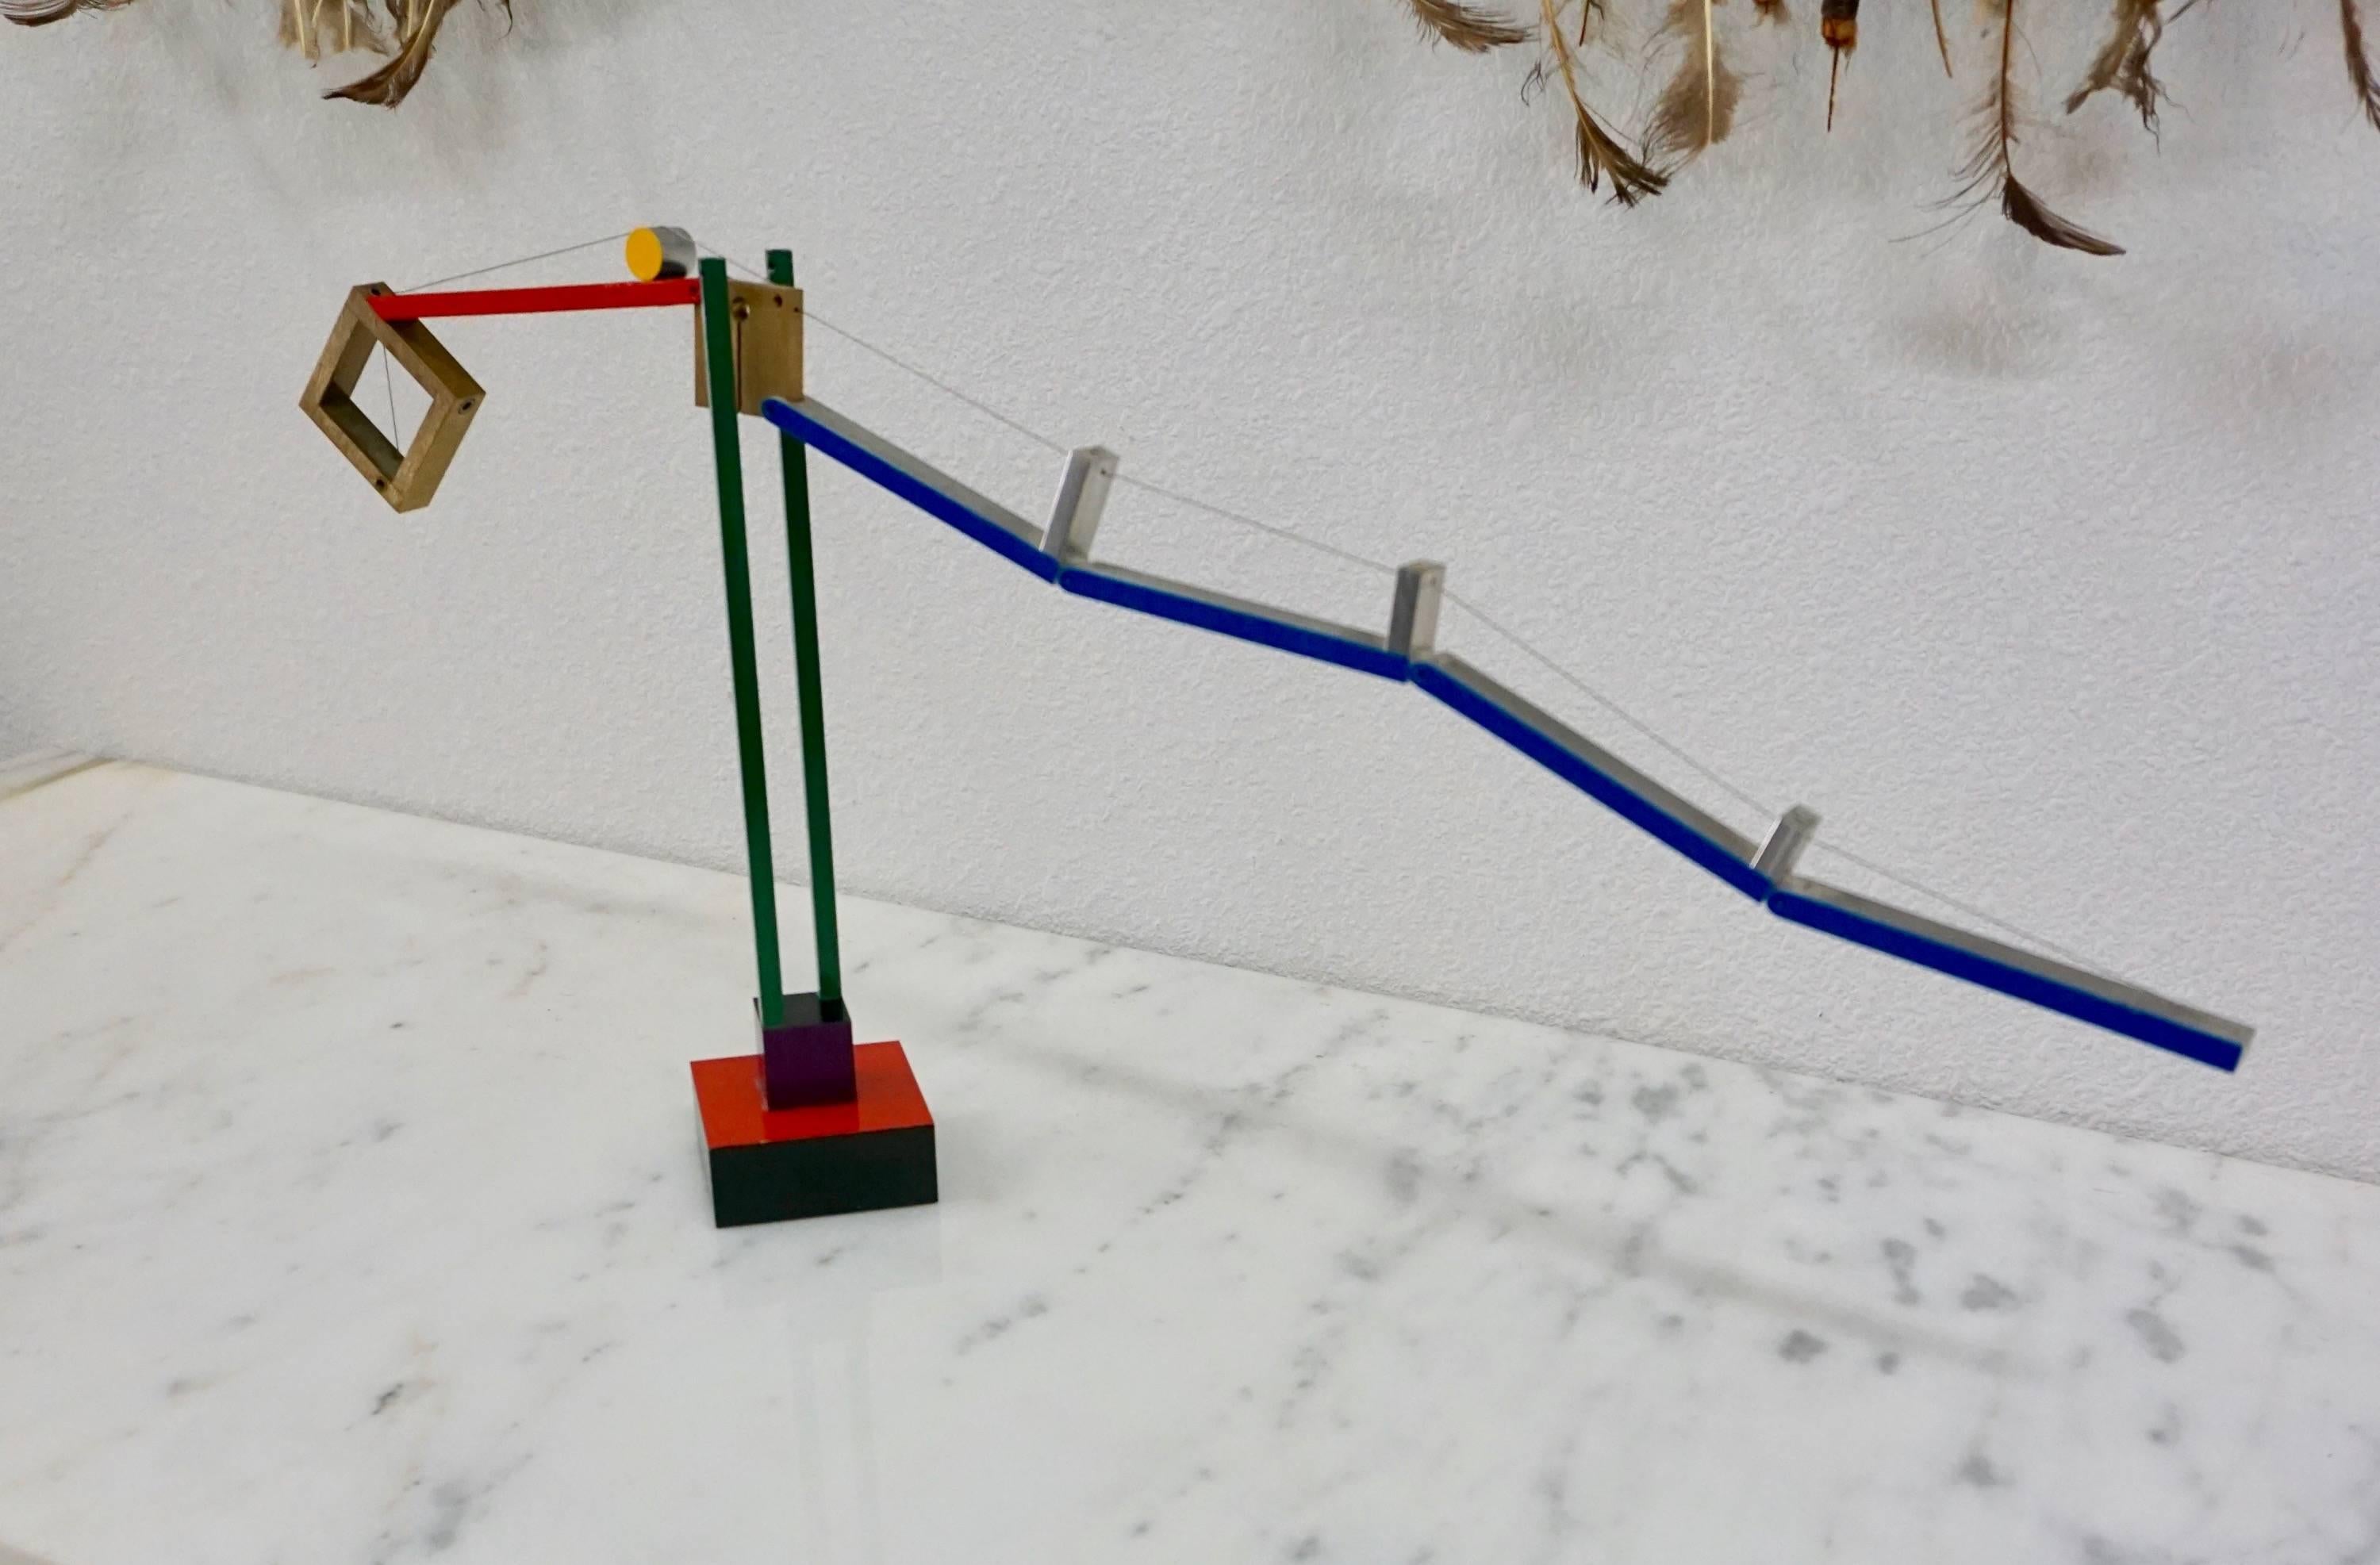 A painted aluminum and steel cable sculpture.
The sculpture has a counterweight and is
balanced on an I beam base.
Signed 